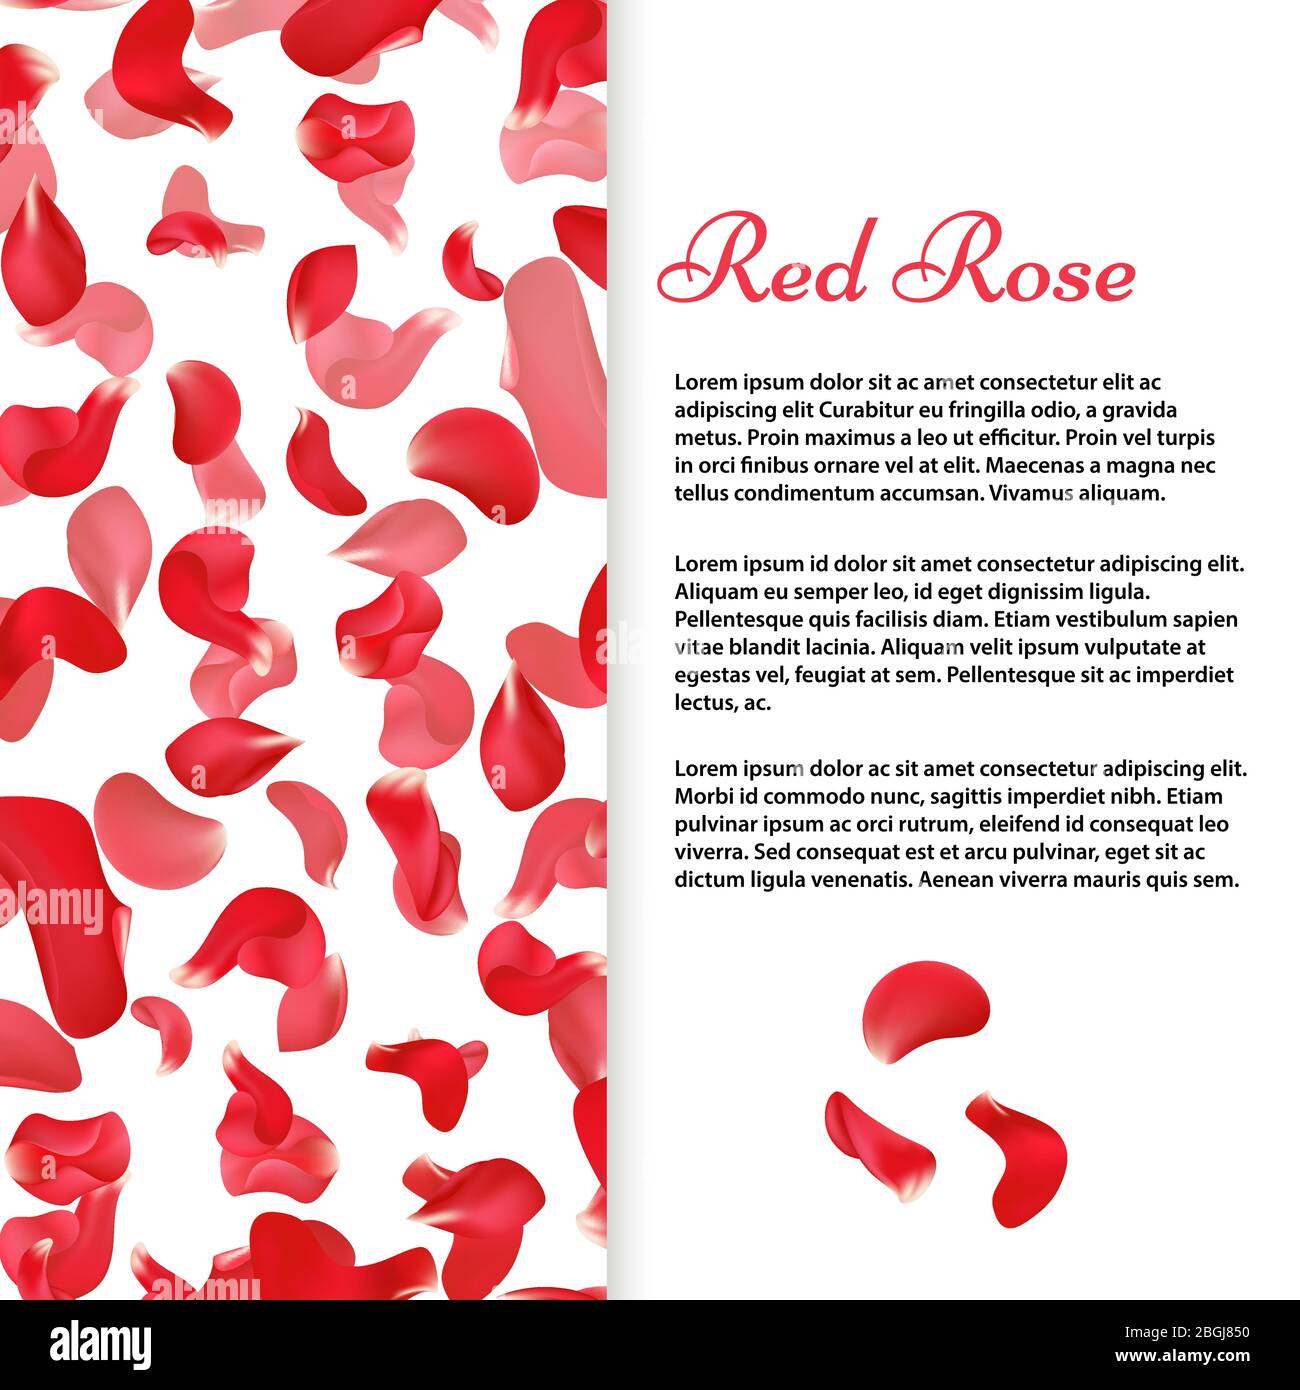 Red rose petals banner or flyer poster vector template illustration Stock Vector